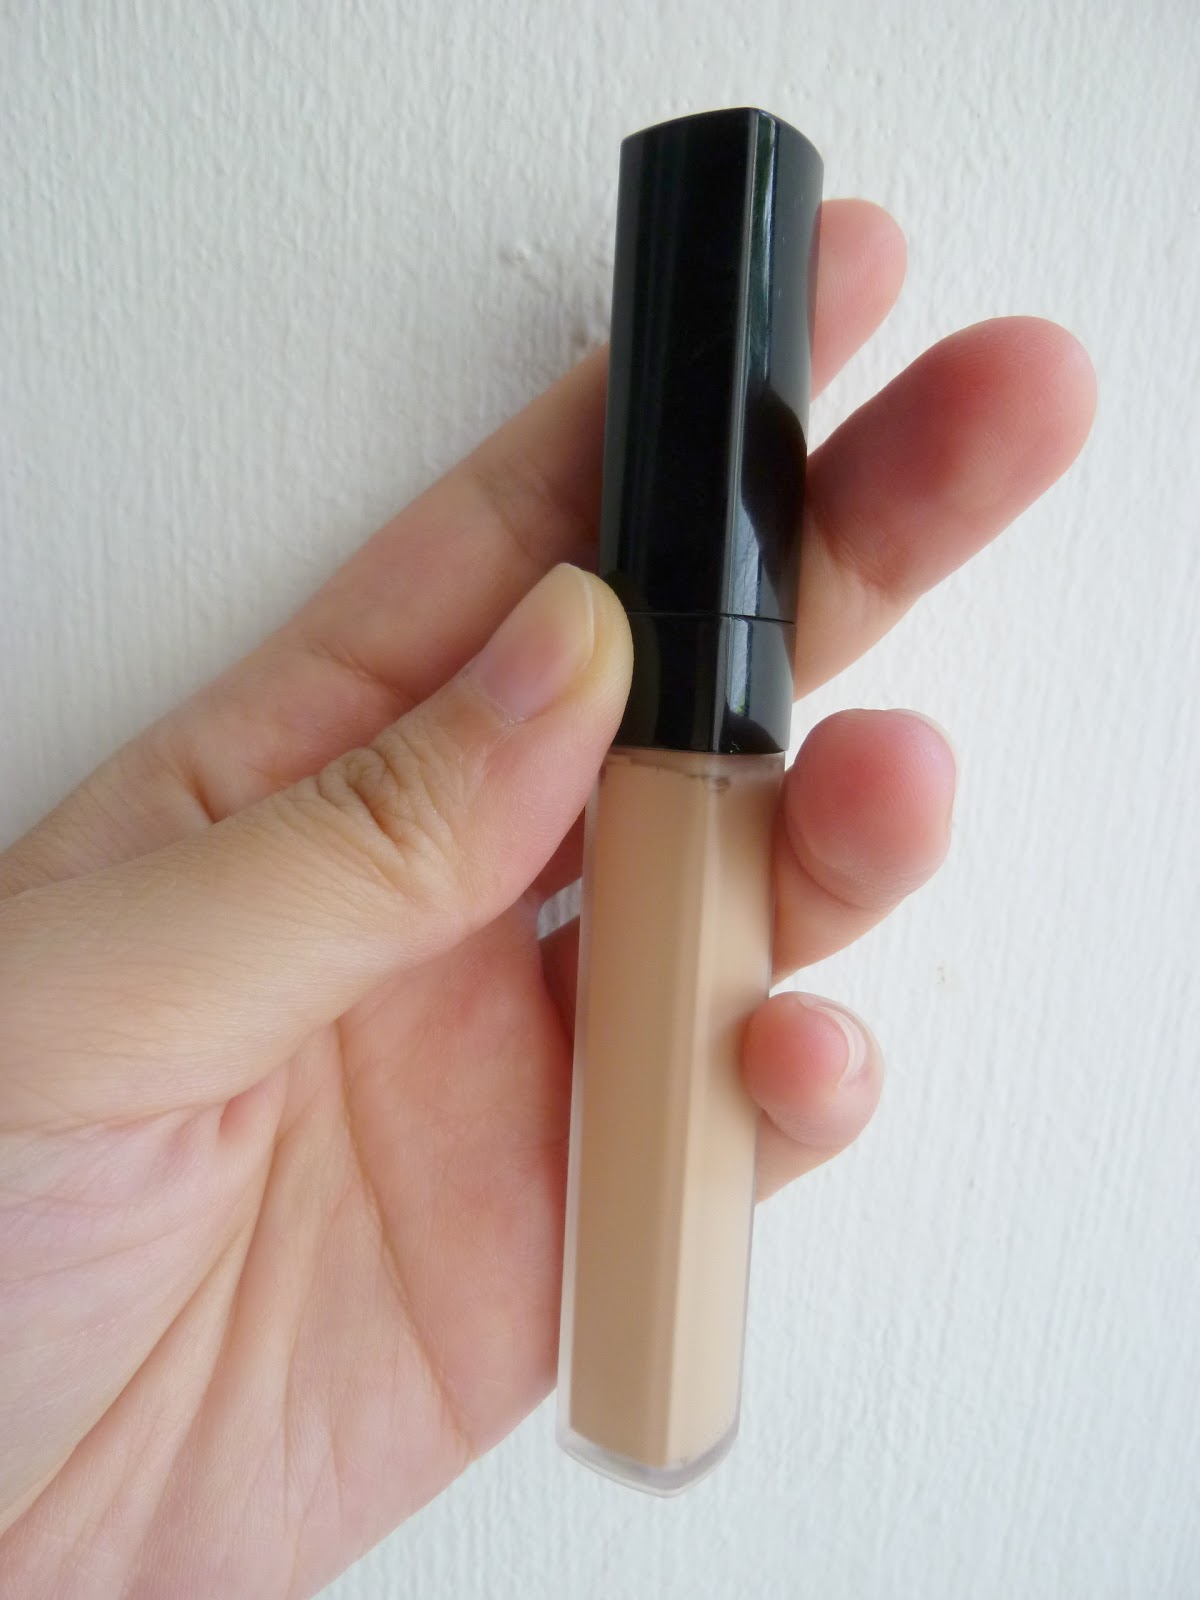 Chanel b10 concealer seems to be a good fit for light neutral olive. It  seems pretty nice. It does read a bit cooler than I'd like. Opinions? :  r/OliveMUA